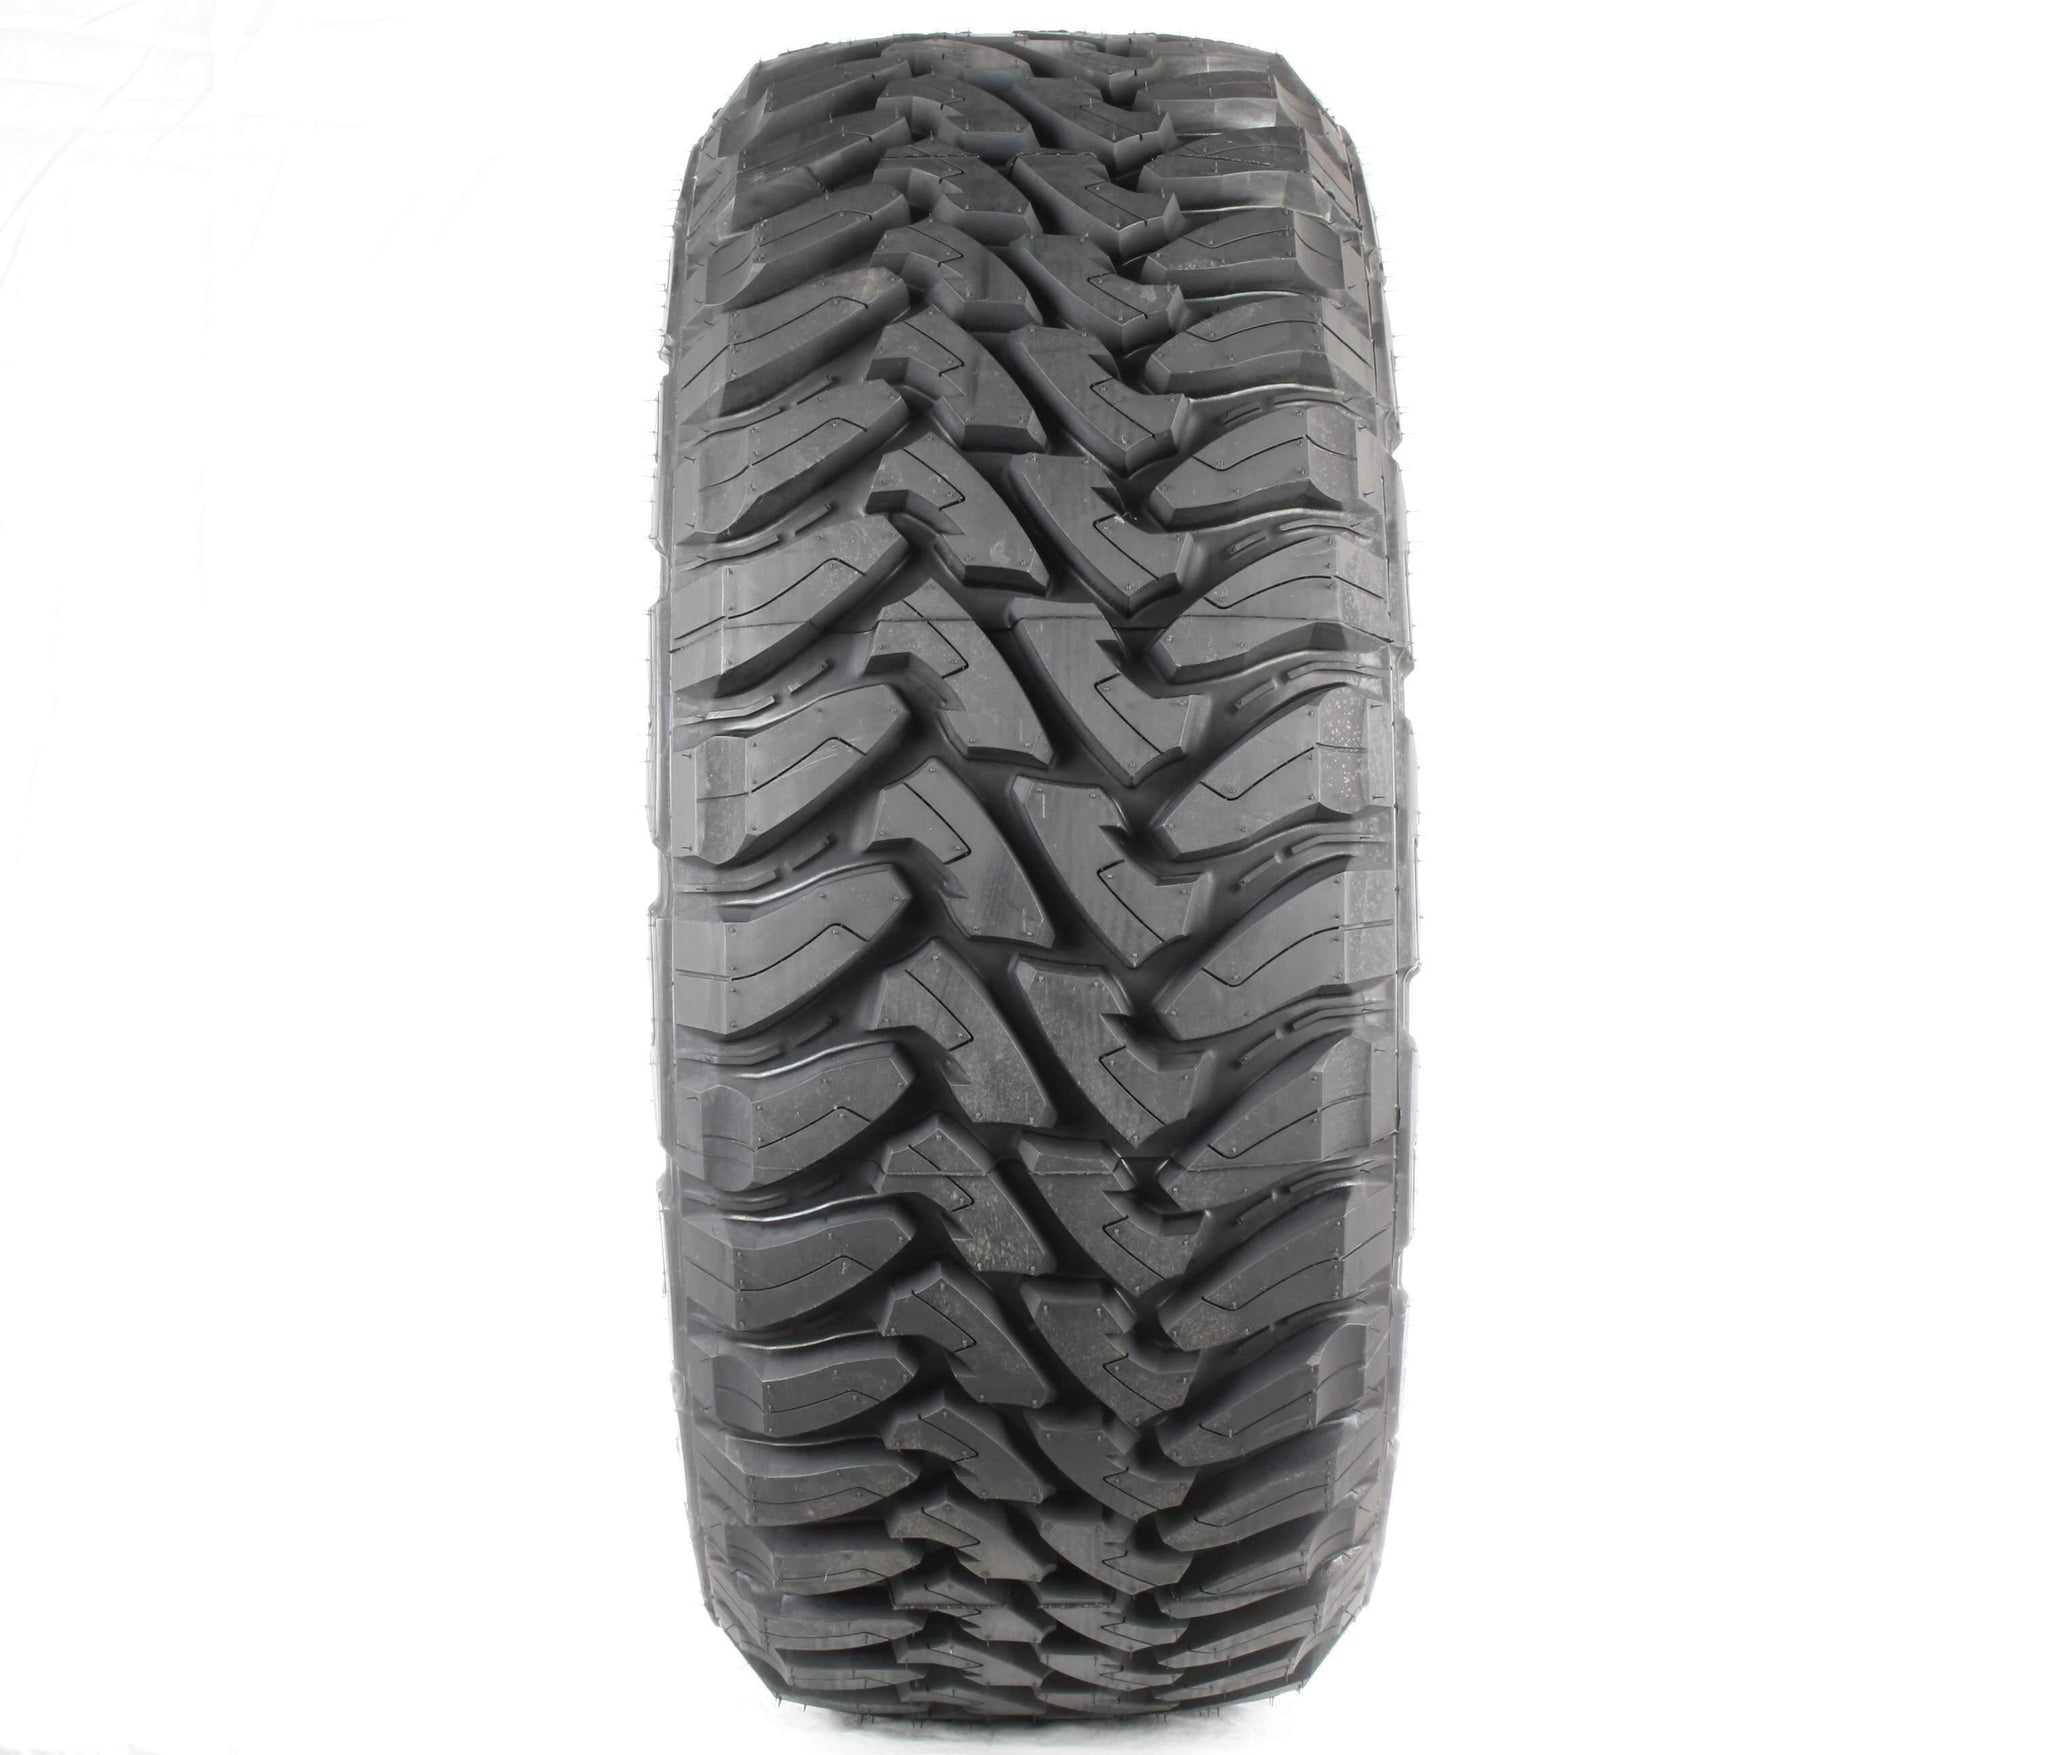 TOYO TIRES OPEN COUNTRY M/T LT255/85R16 (33.5X10.2R 16) Tires